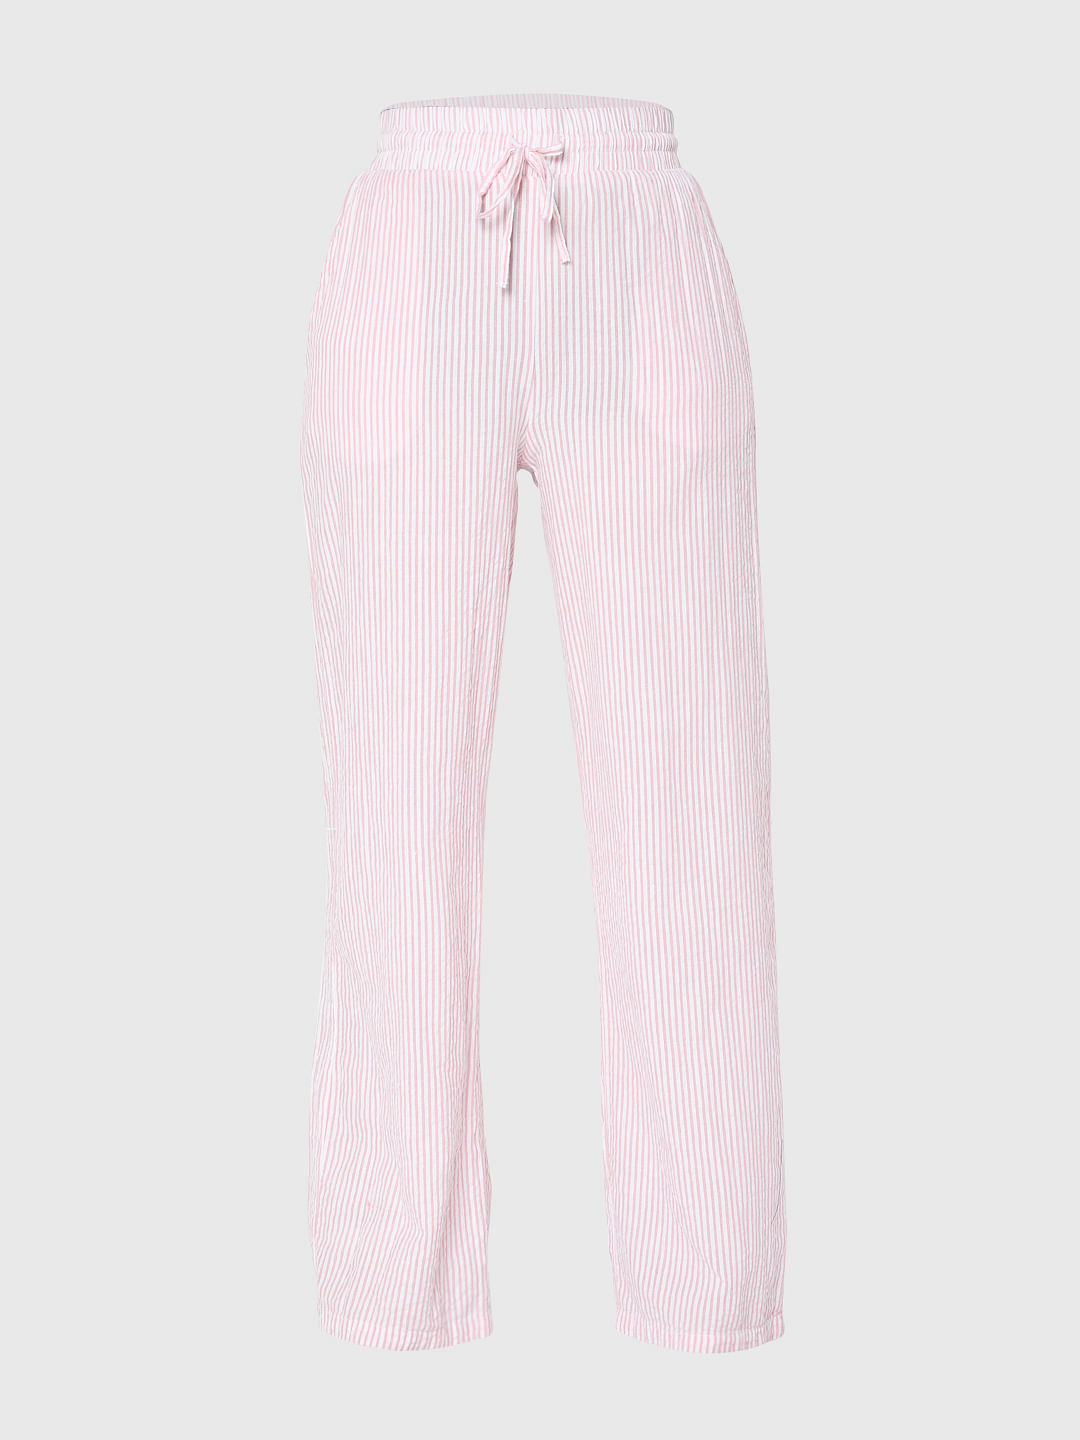 Details 199+ pink striped trousers latest